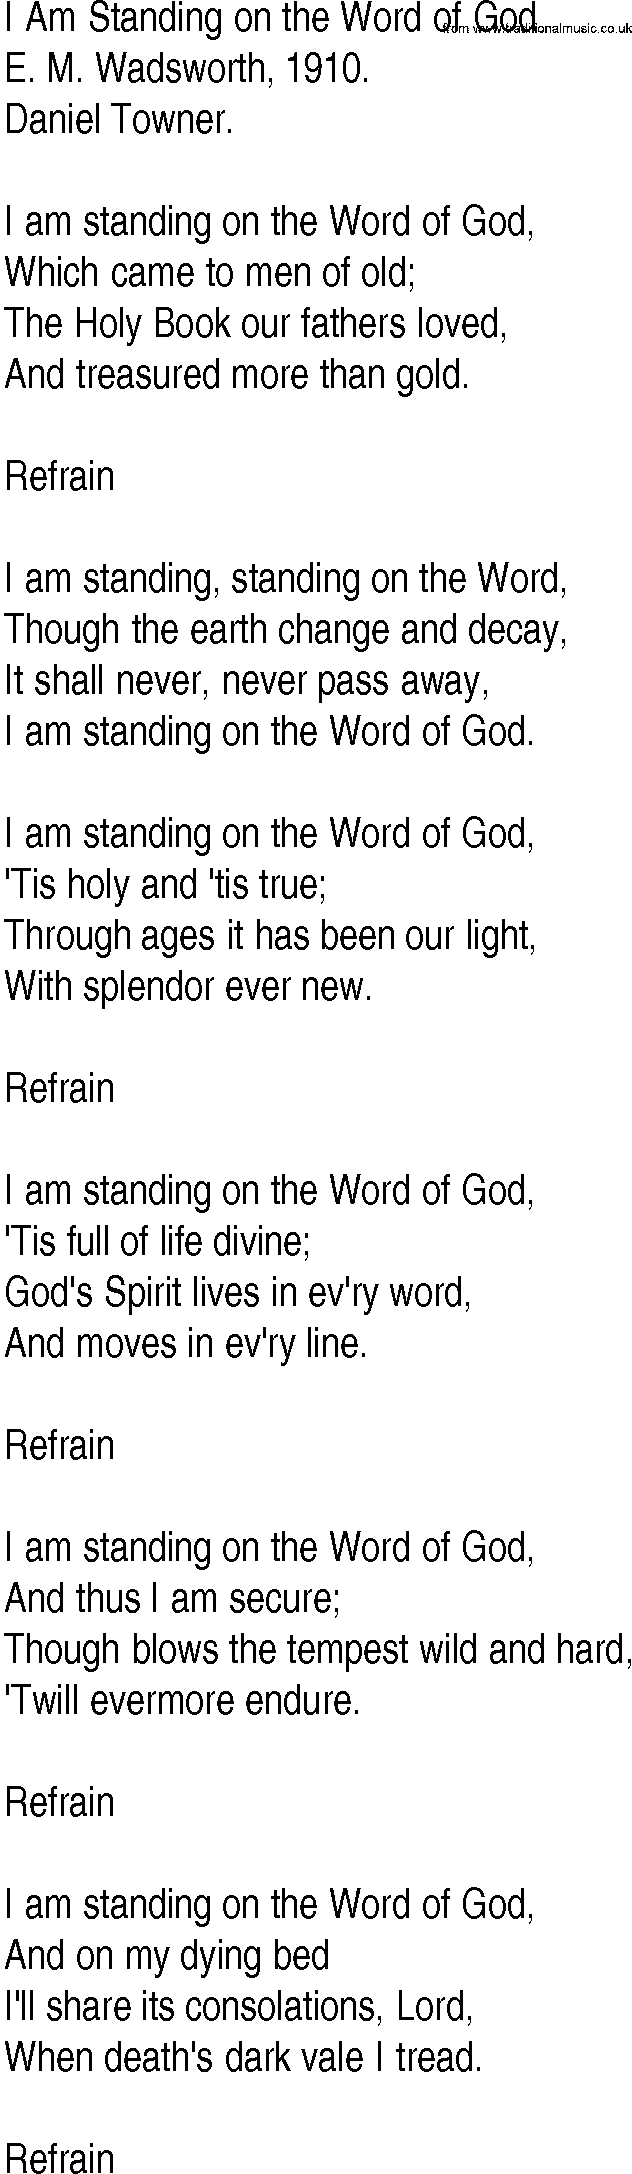 Hymn and Gospel Song: I Am Standing on the Word of God by E M Wadsworth lyrics